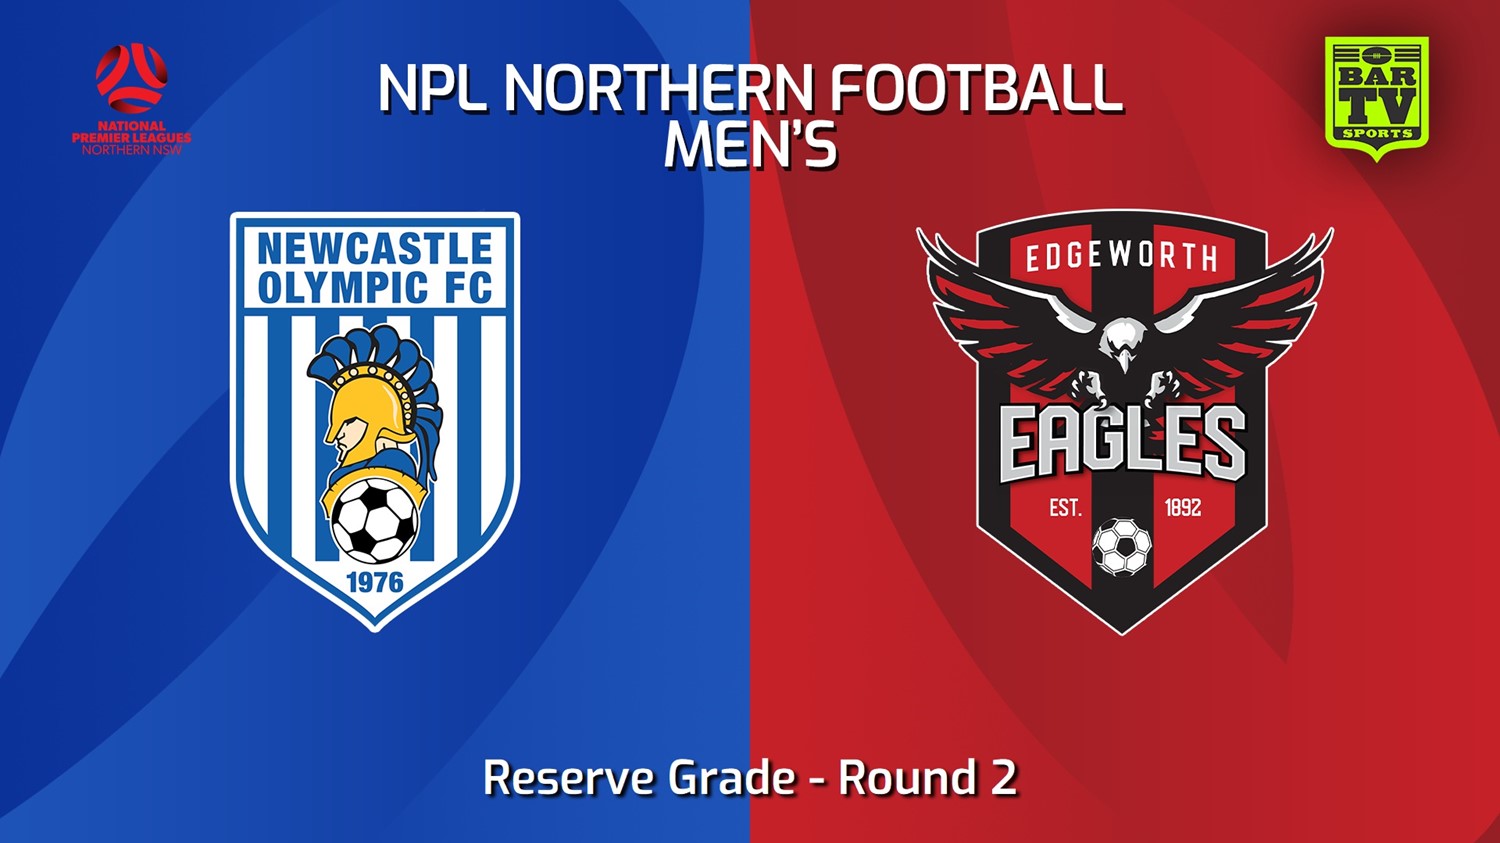 240302-NNSW NPLM Res Round 2 - Newcastle Olympic Res v Edgeworth Eagles Res Minigame Slate Image